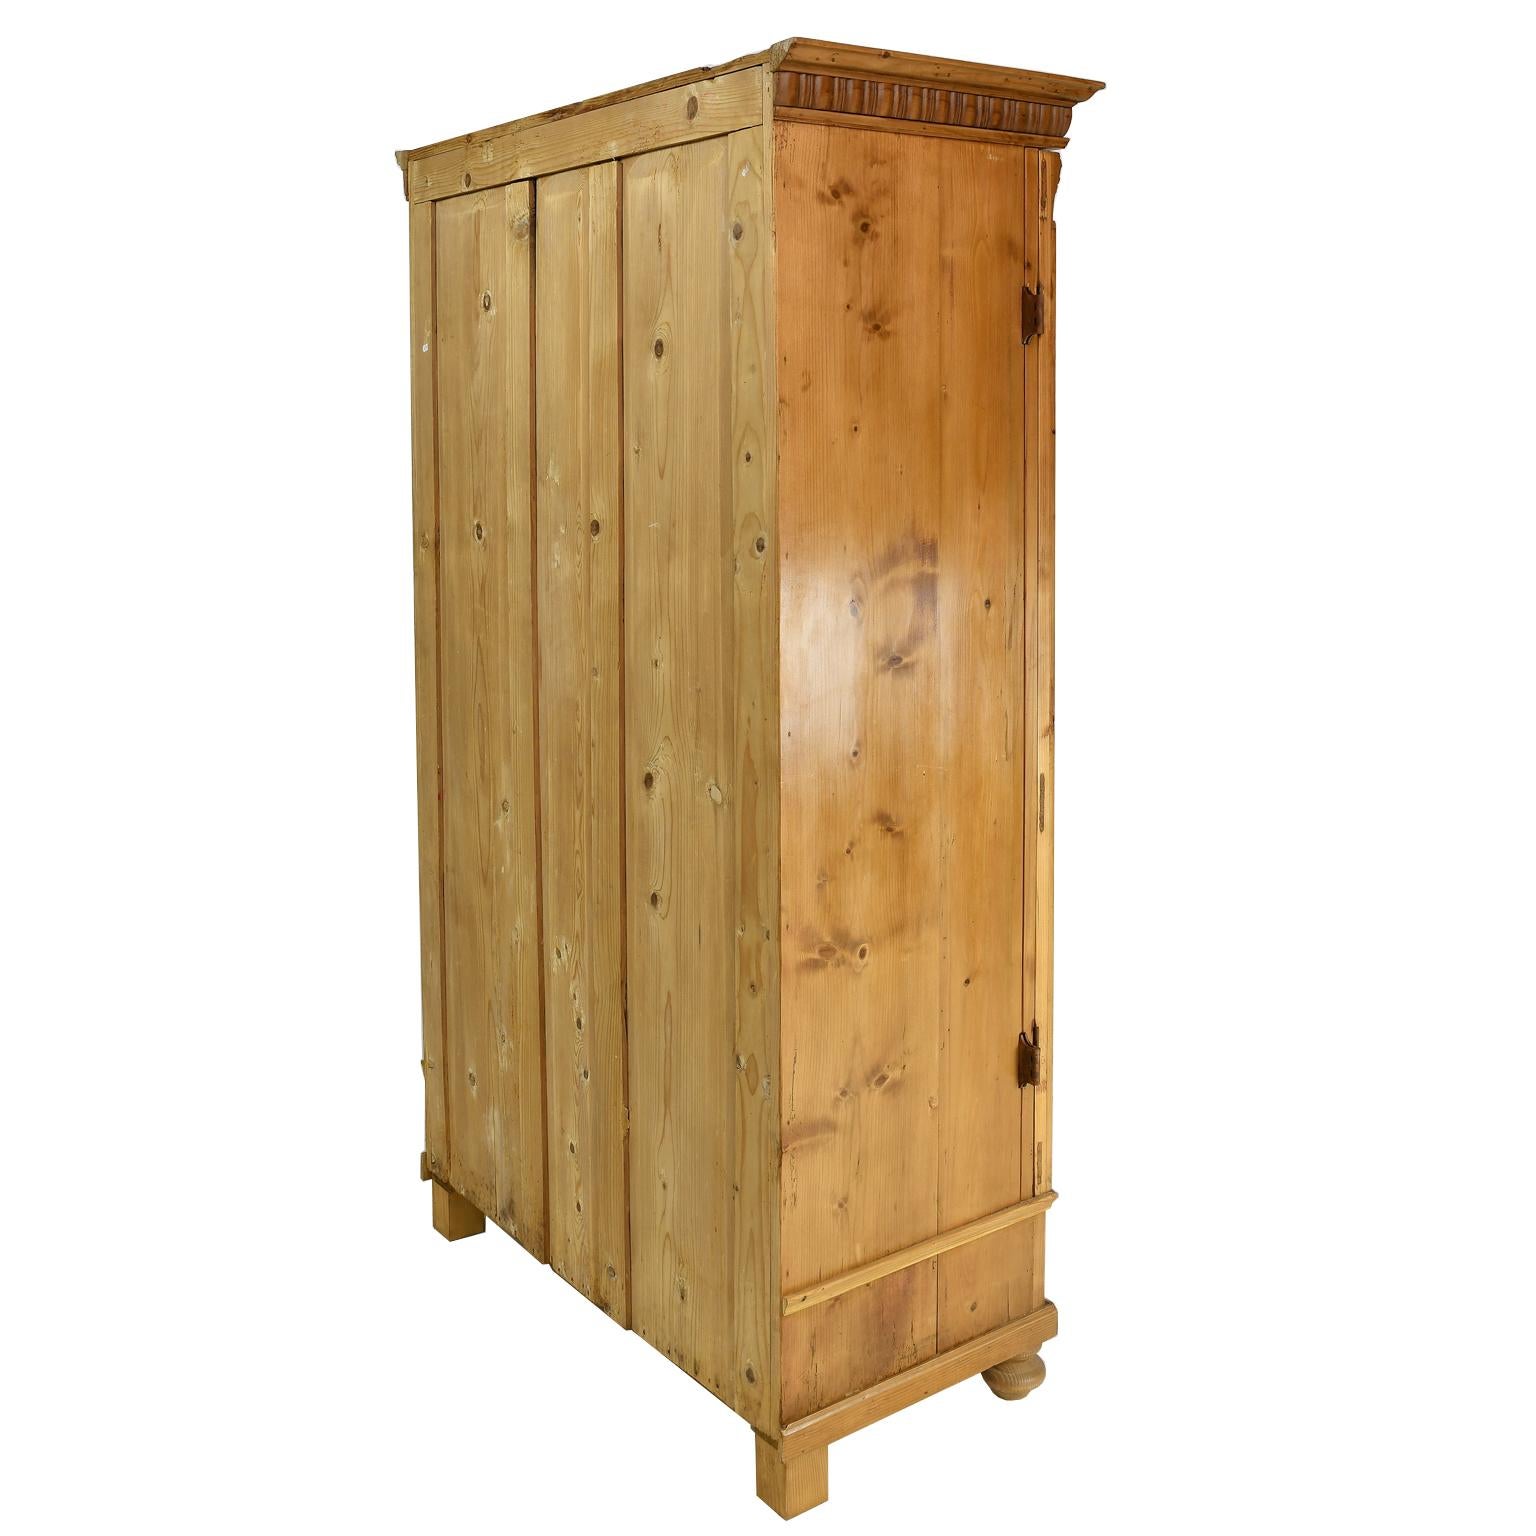 Austrian/ Hungarian Rustic Pine Armoire, circa 1840 with Parliament Hinges 5